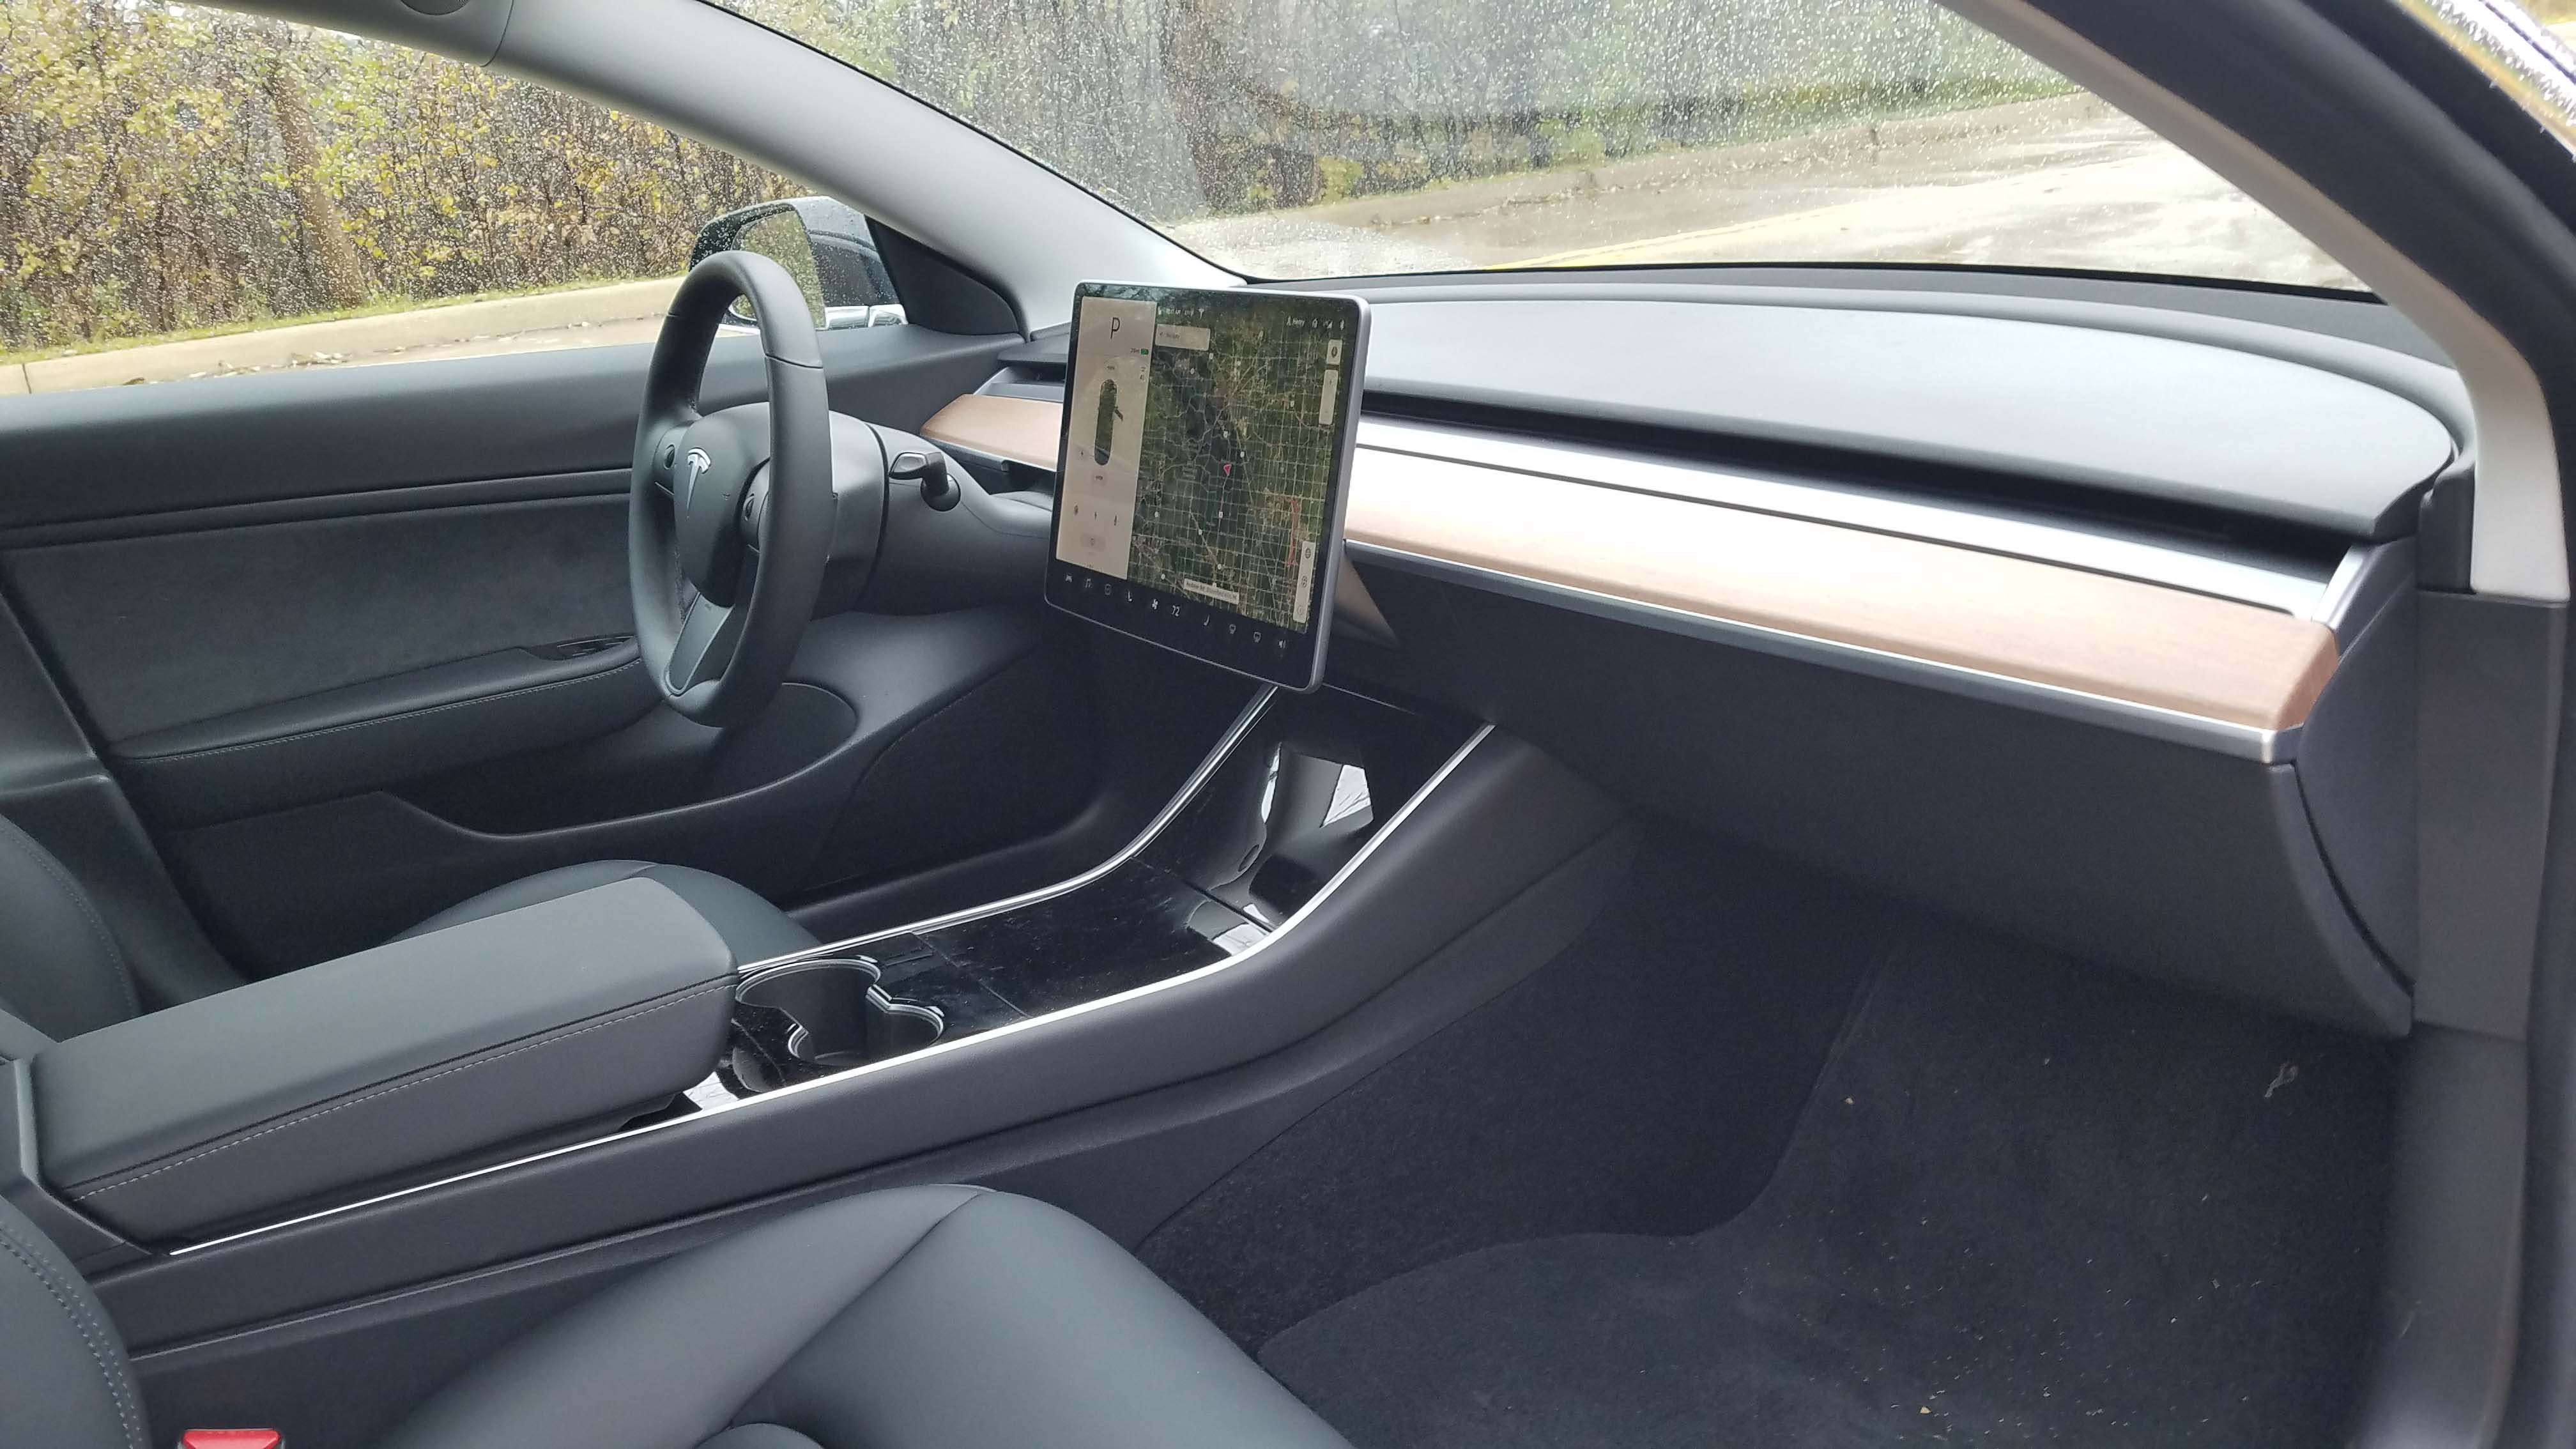 The minimalist interior of the Tesla Model 3 is similar to Apple products.